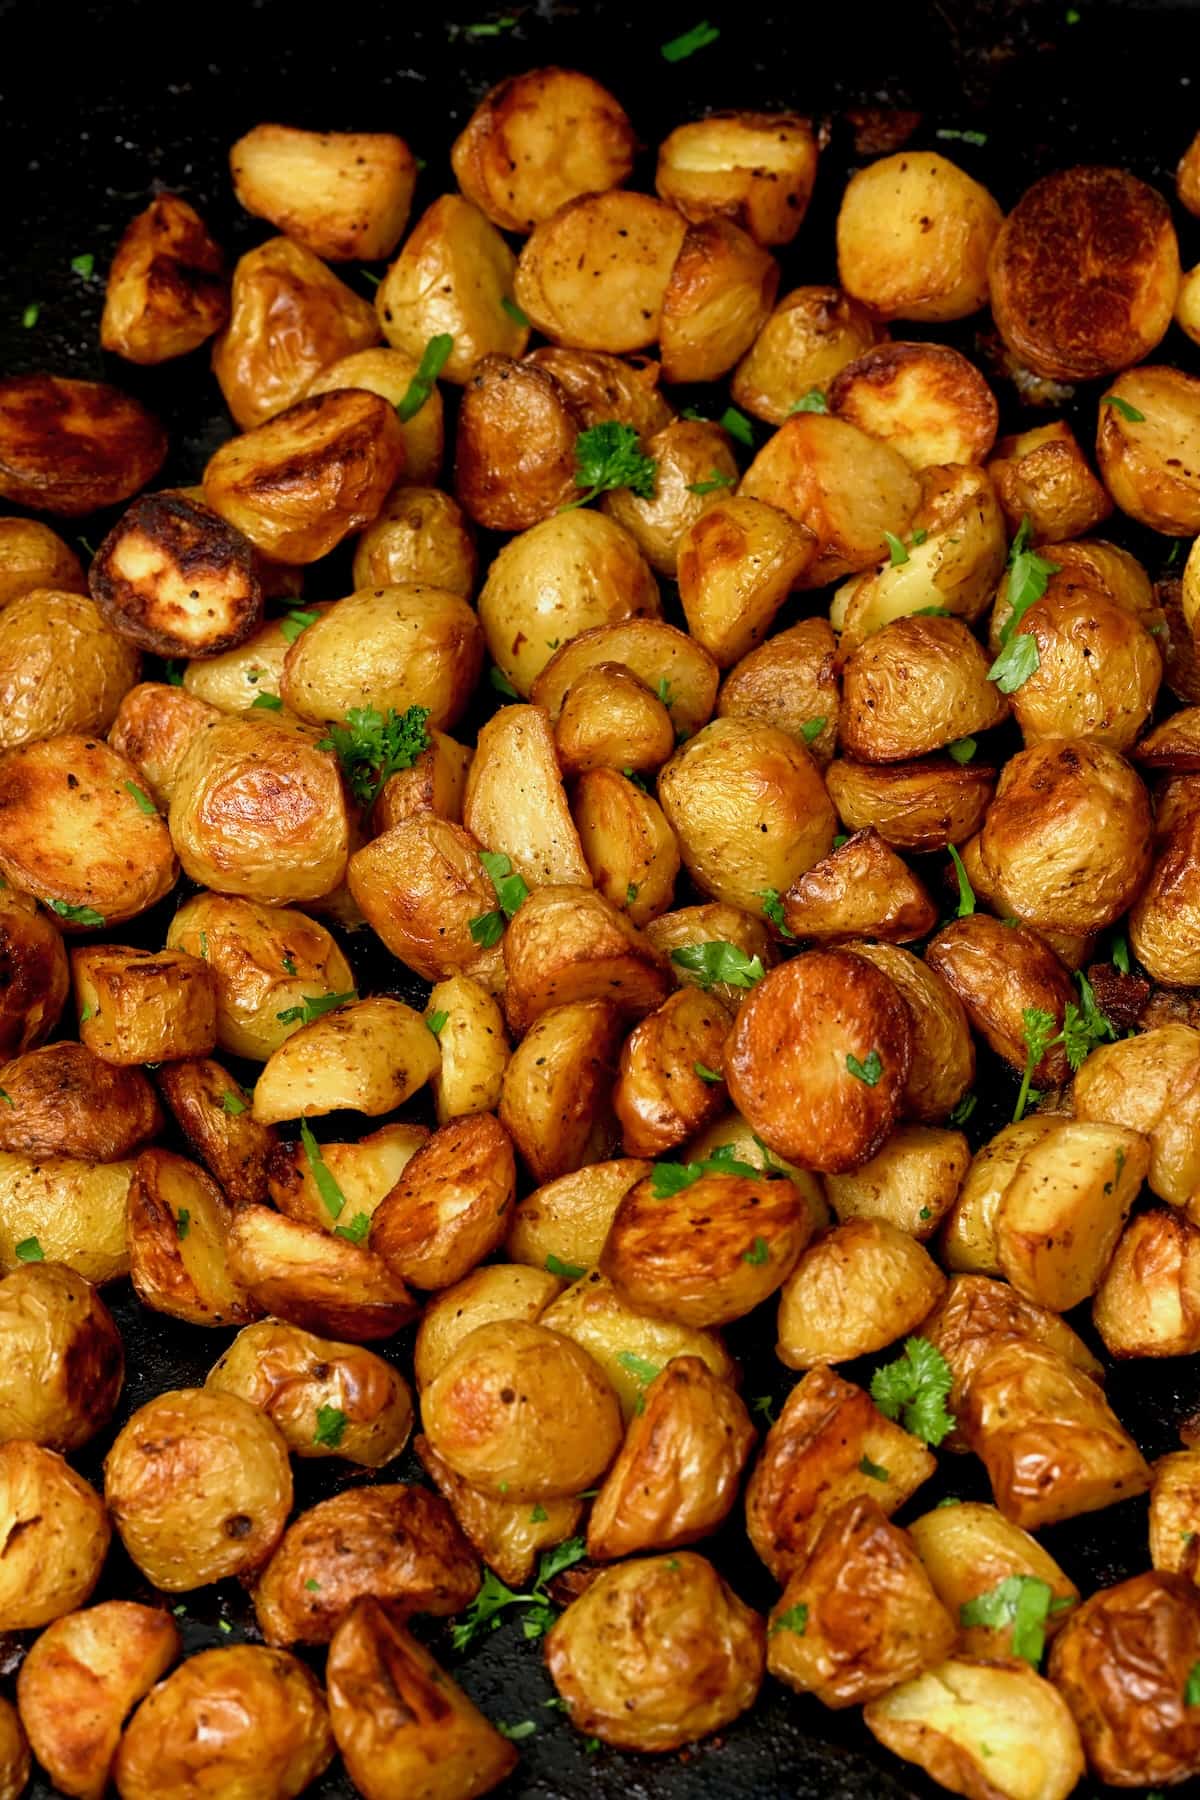 Oven roasted potatoes topped with parsley